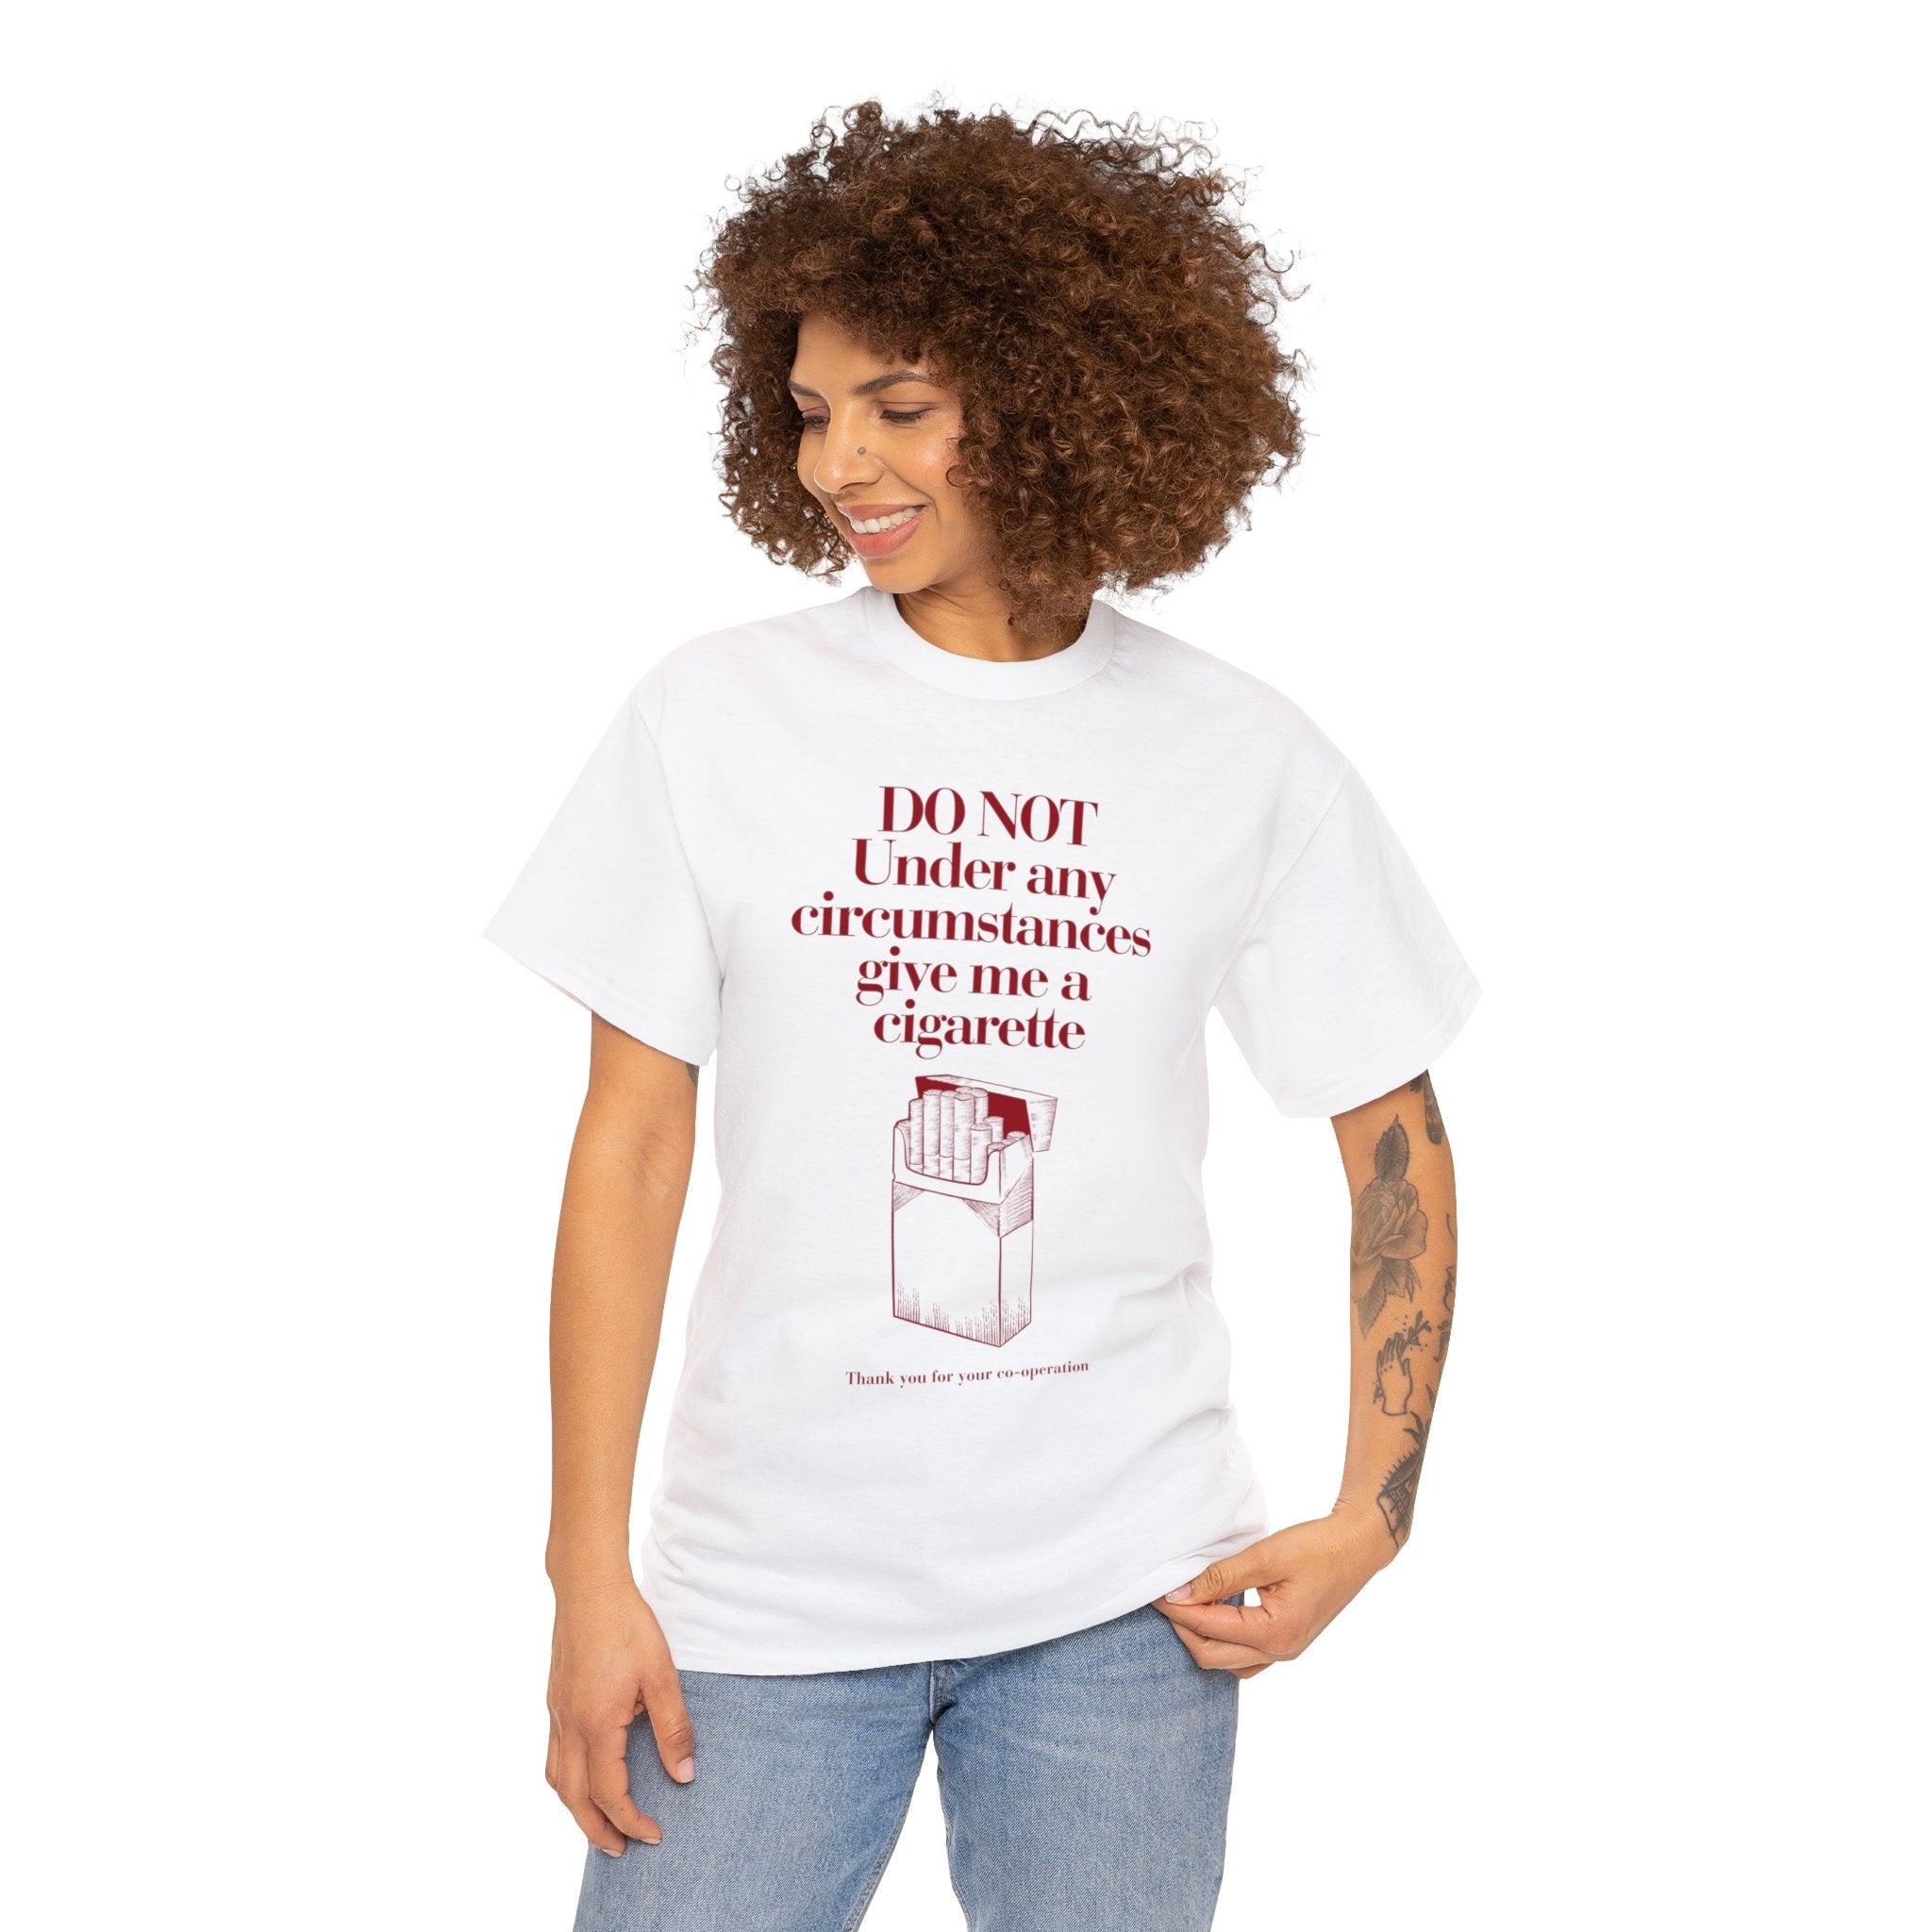 Do not under and circumstance give me a cigarette - Unisex Heavy Cotton Tee